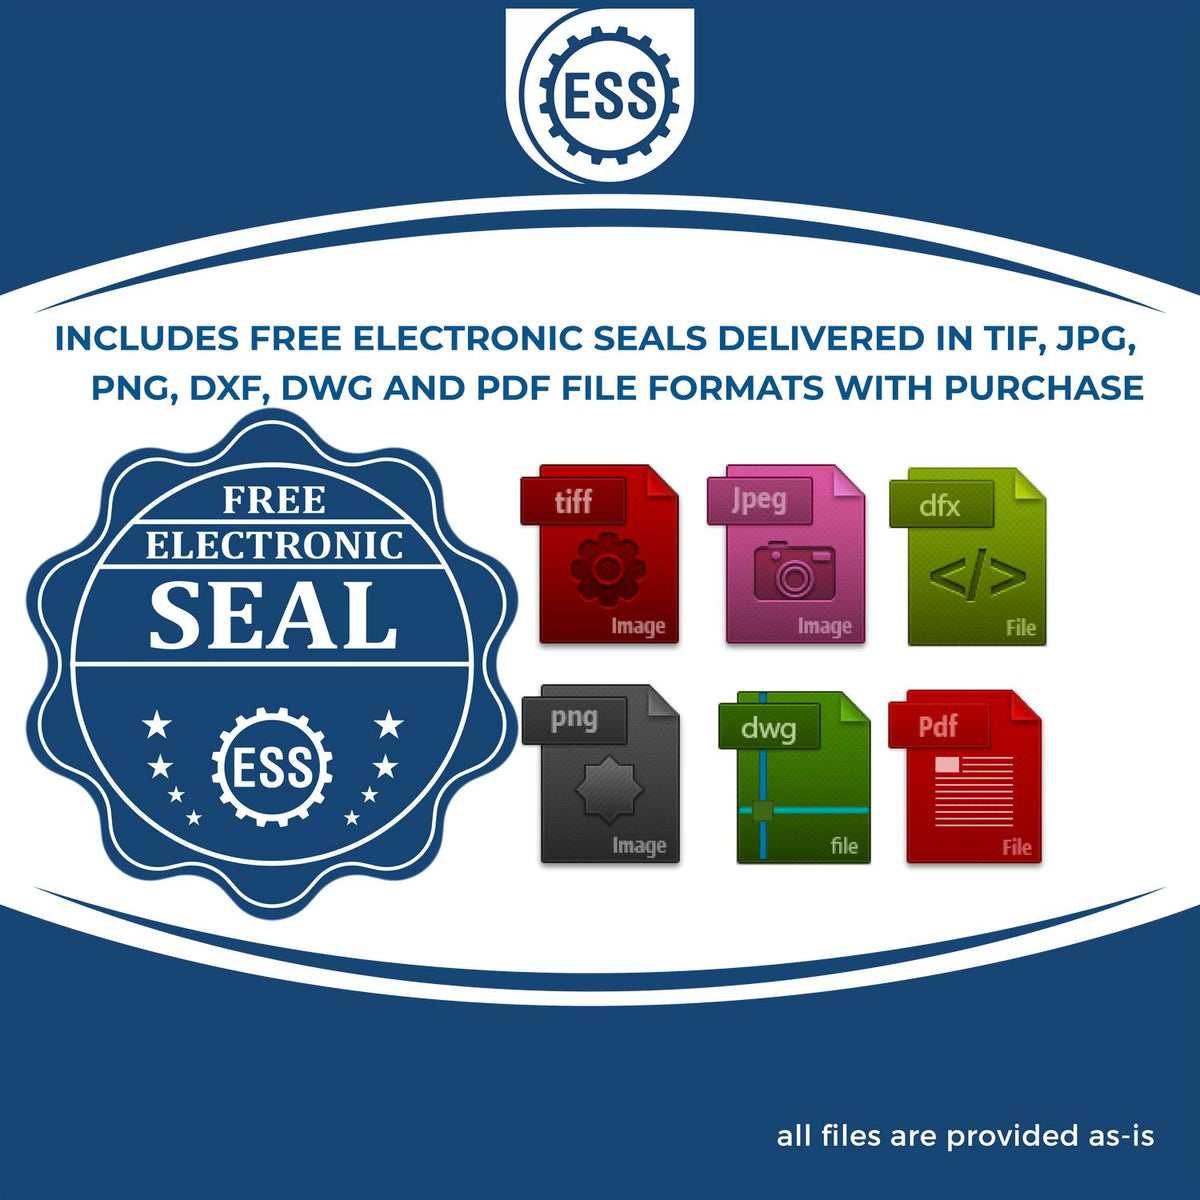 An infographic for the free electronic seal for the Heavy Duty Cast Iron New Jersey Engineer Seal Embosser illustrating the different file type icons such as DXF, DWG, TIF, JPG and PNG.